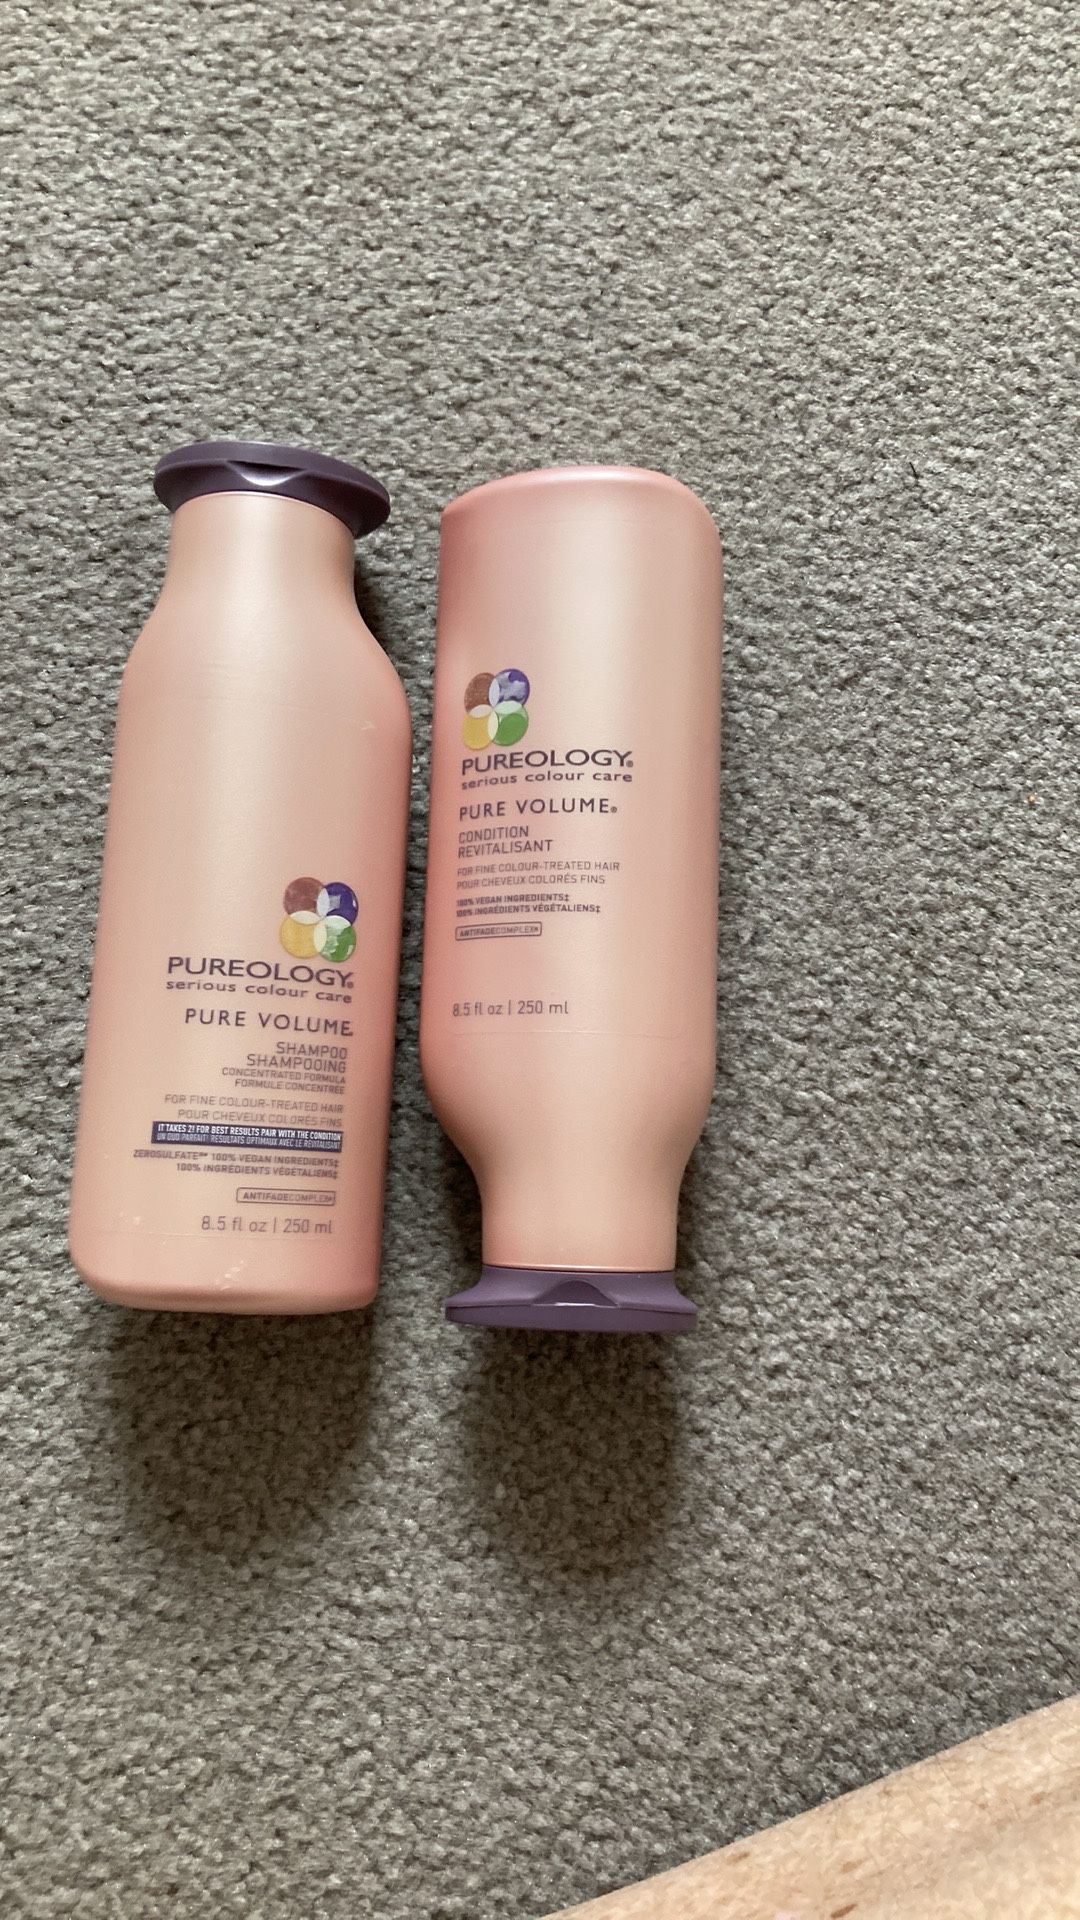 at retfærdiggøre udvande mens Pureology Shampoo /conditioner for Sale in East Patchogue, NY - OfferUp